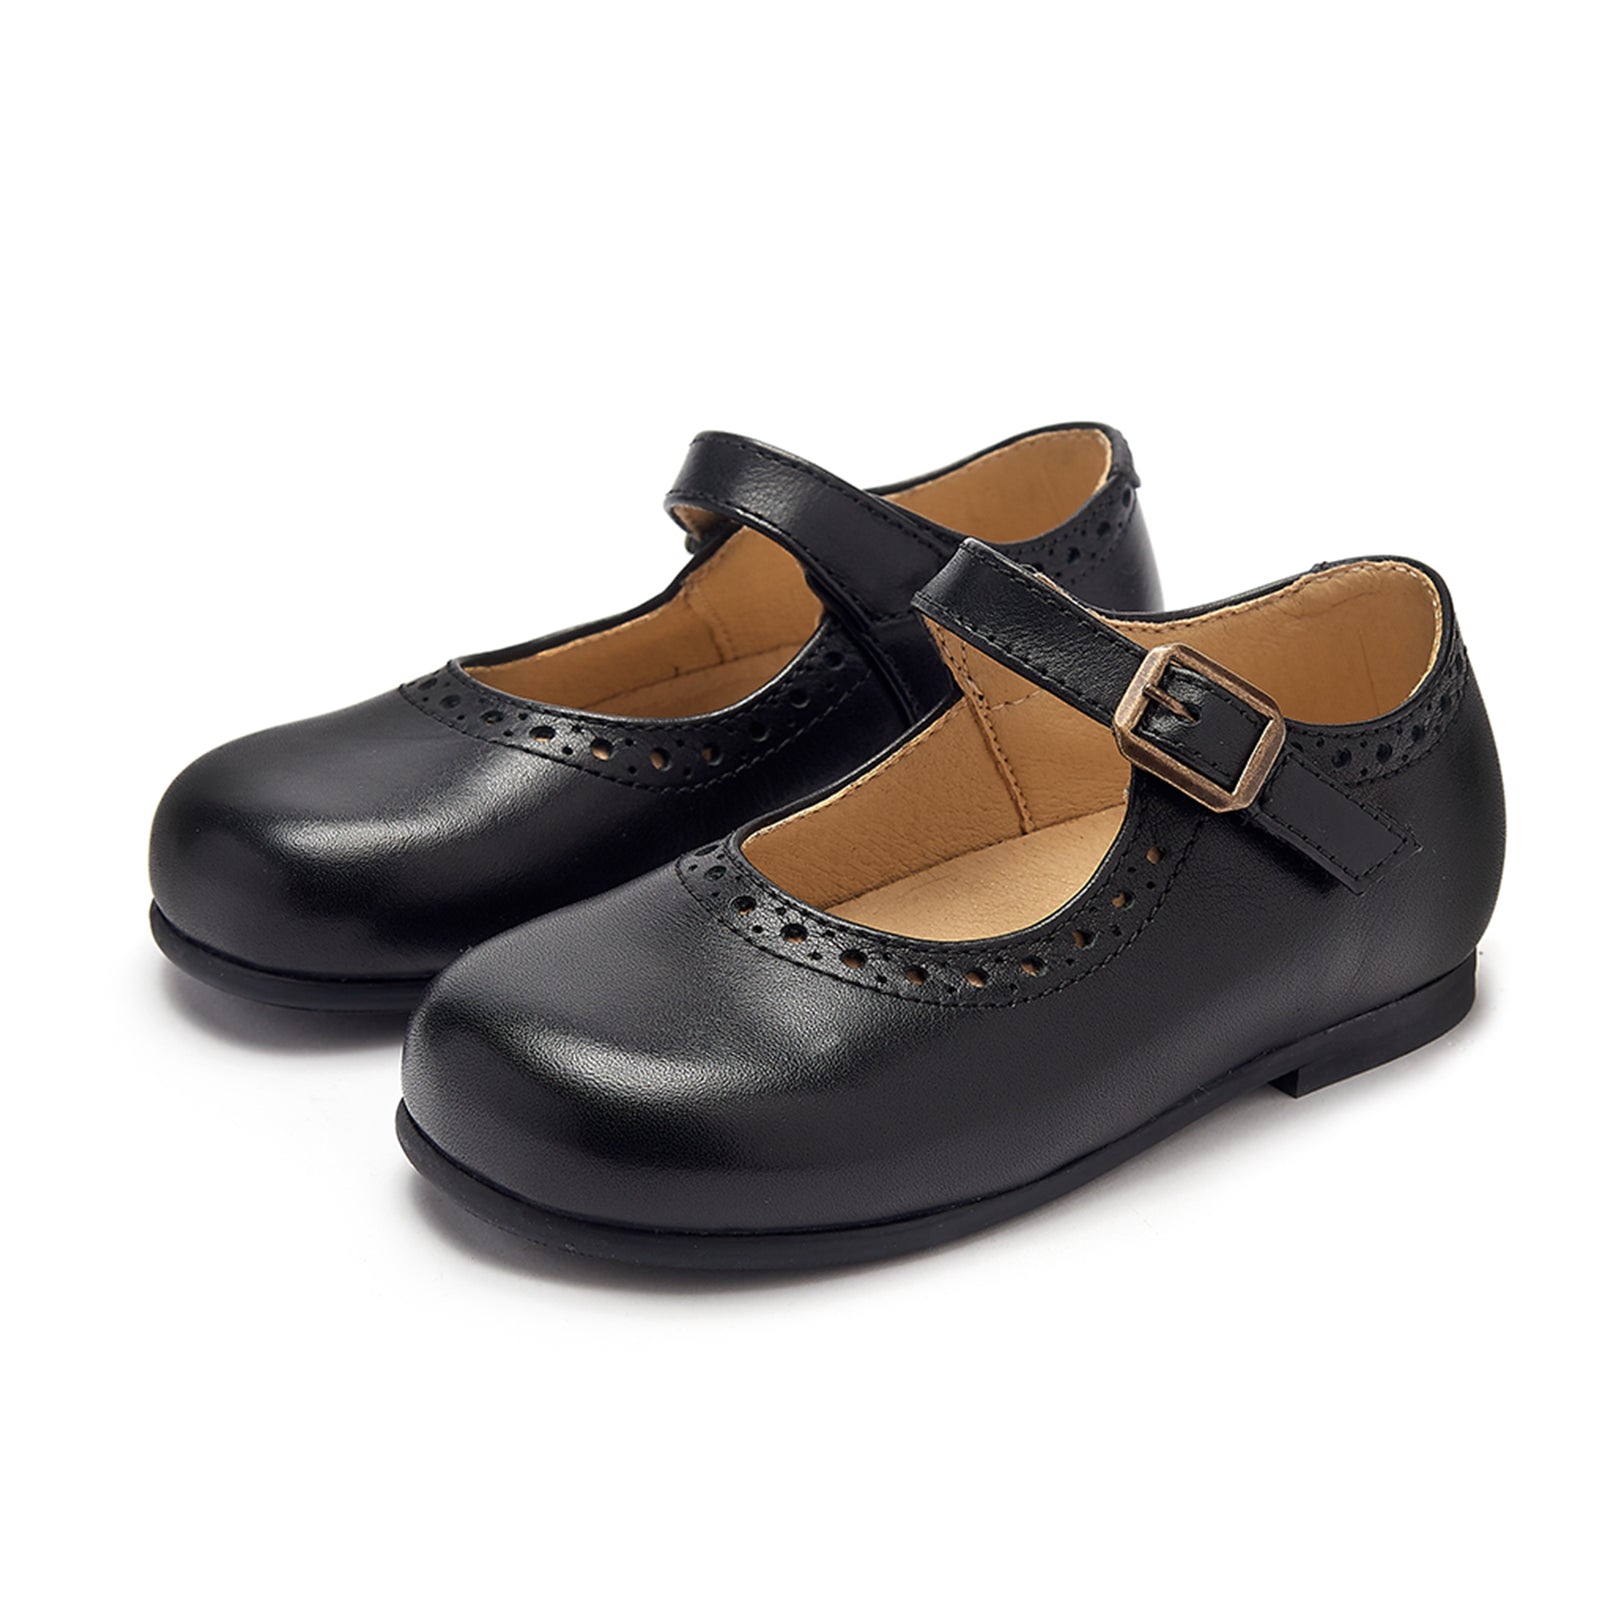 Young Soles Diana Black Mary Jane Leather Shoes